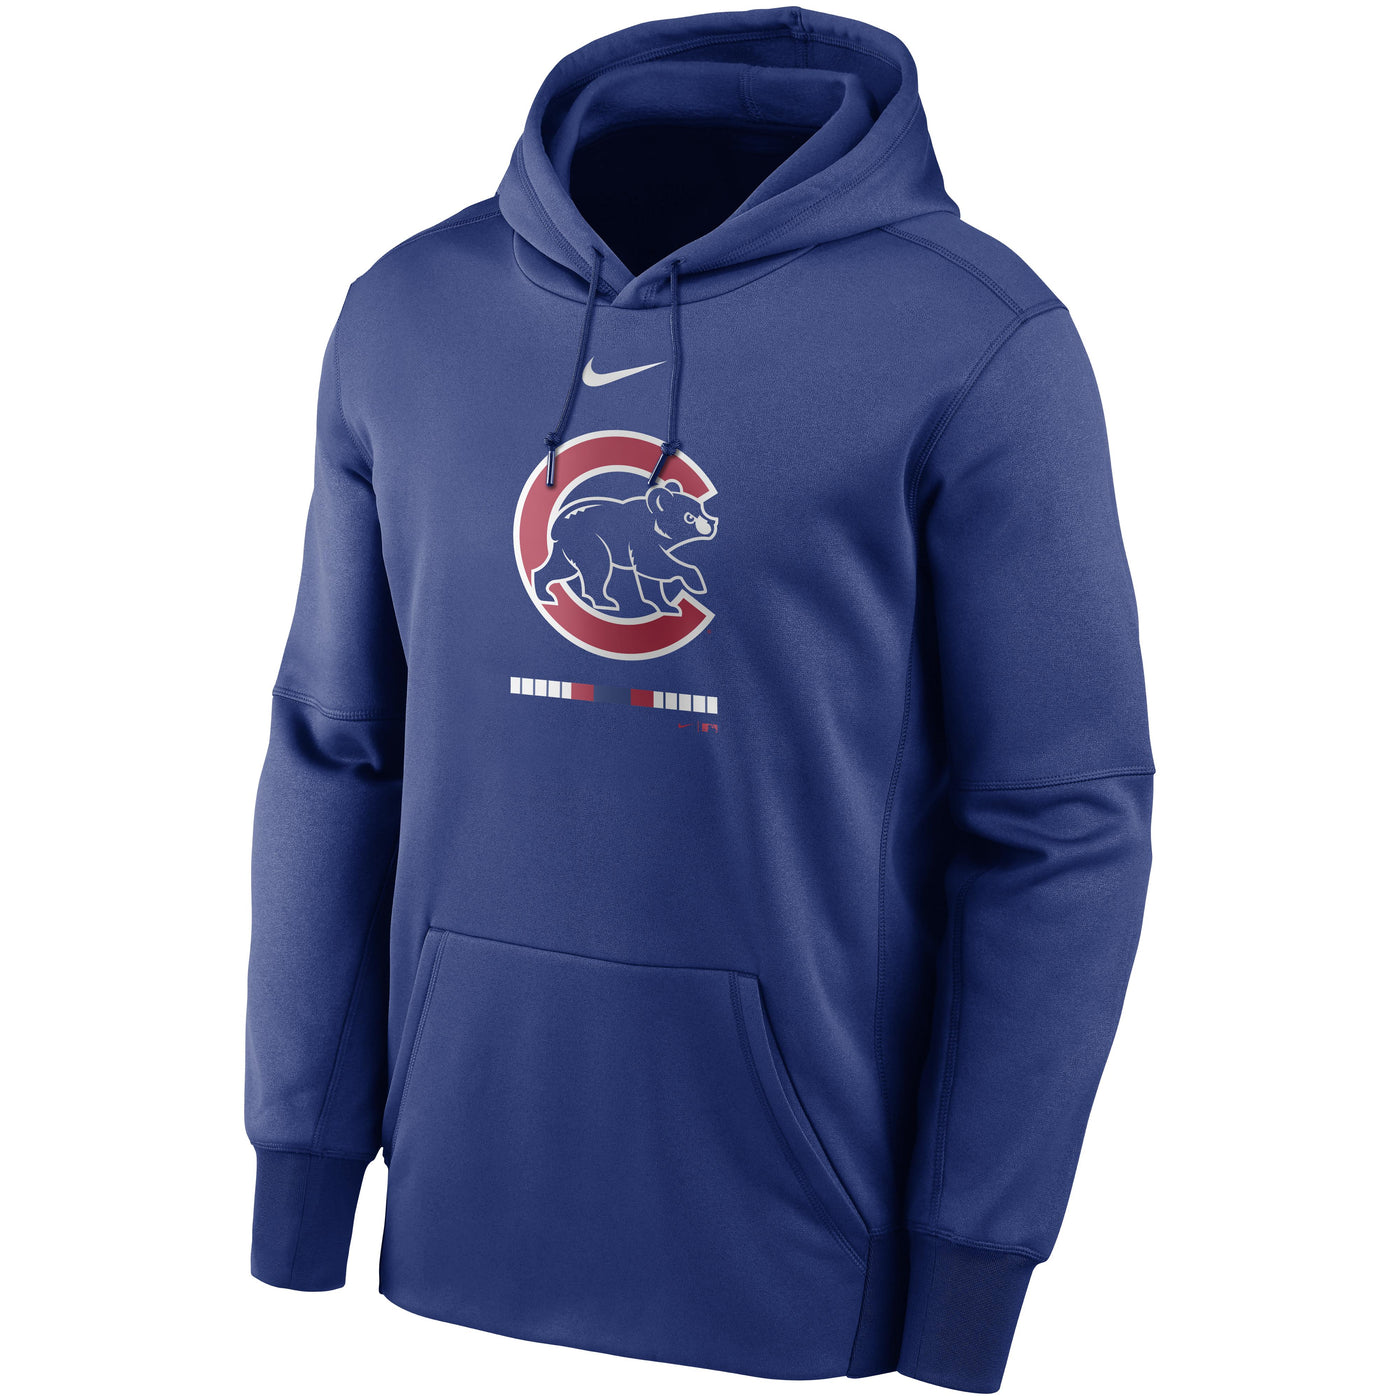 LEGACY CHICAGO CUBS PERFORMANCE HOODIE - Ivy Shop